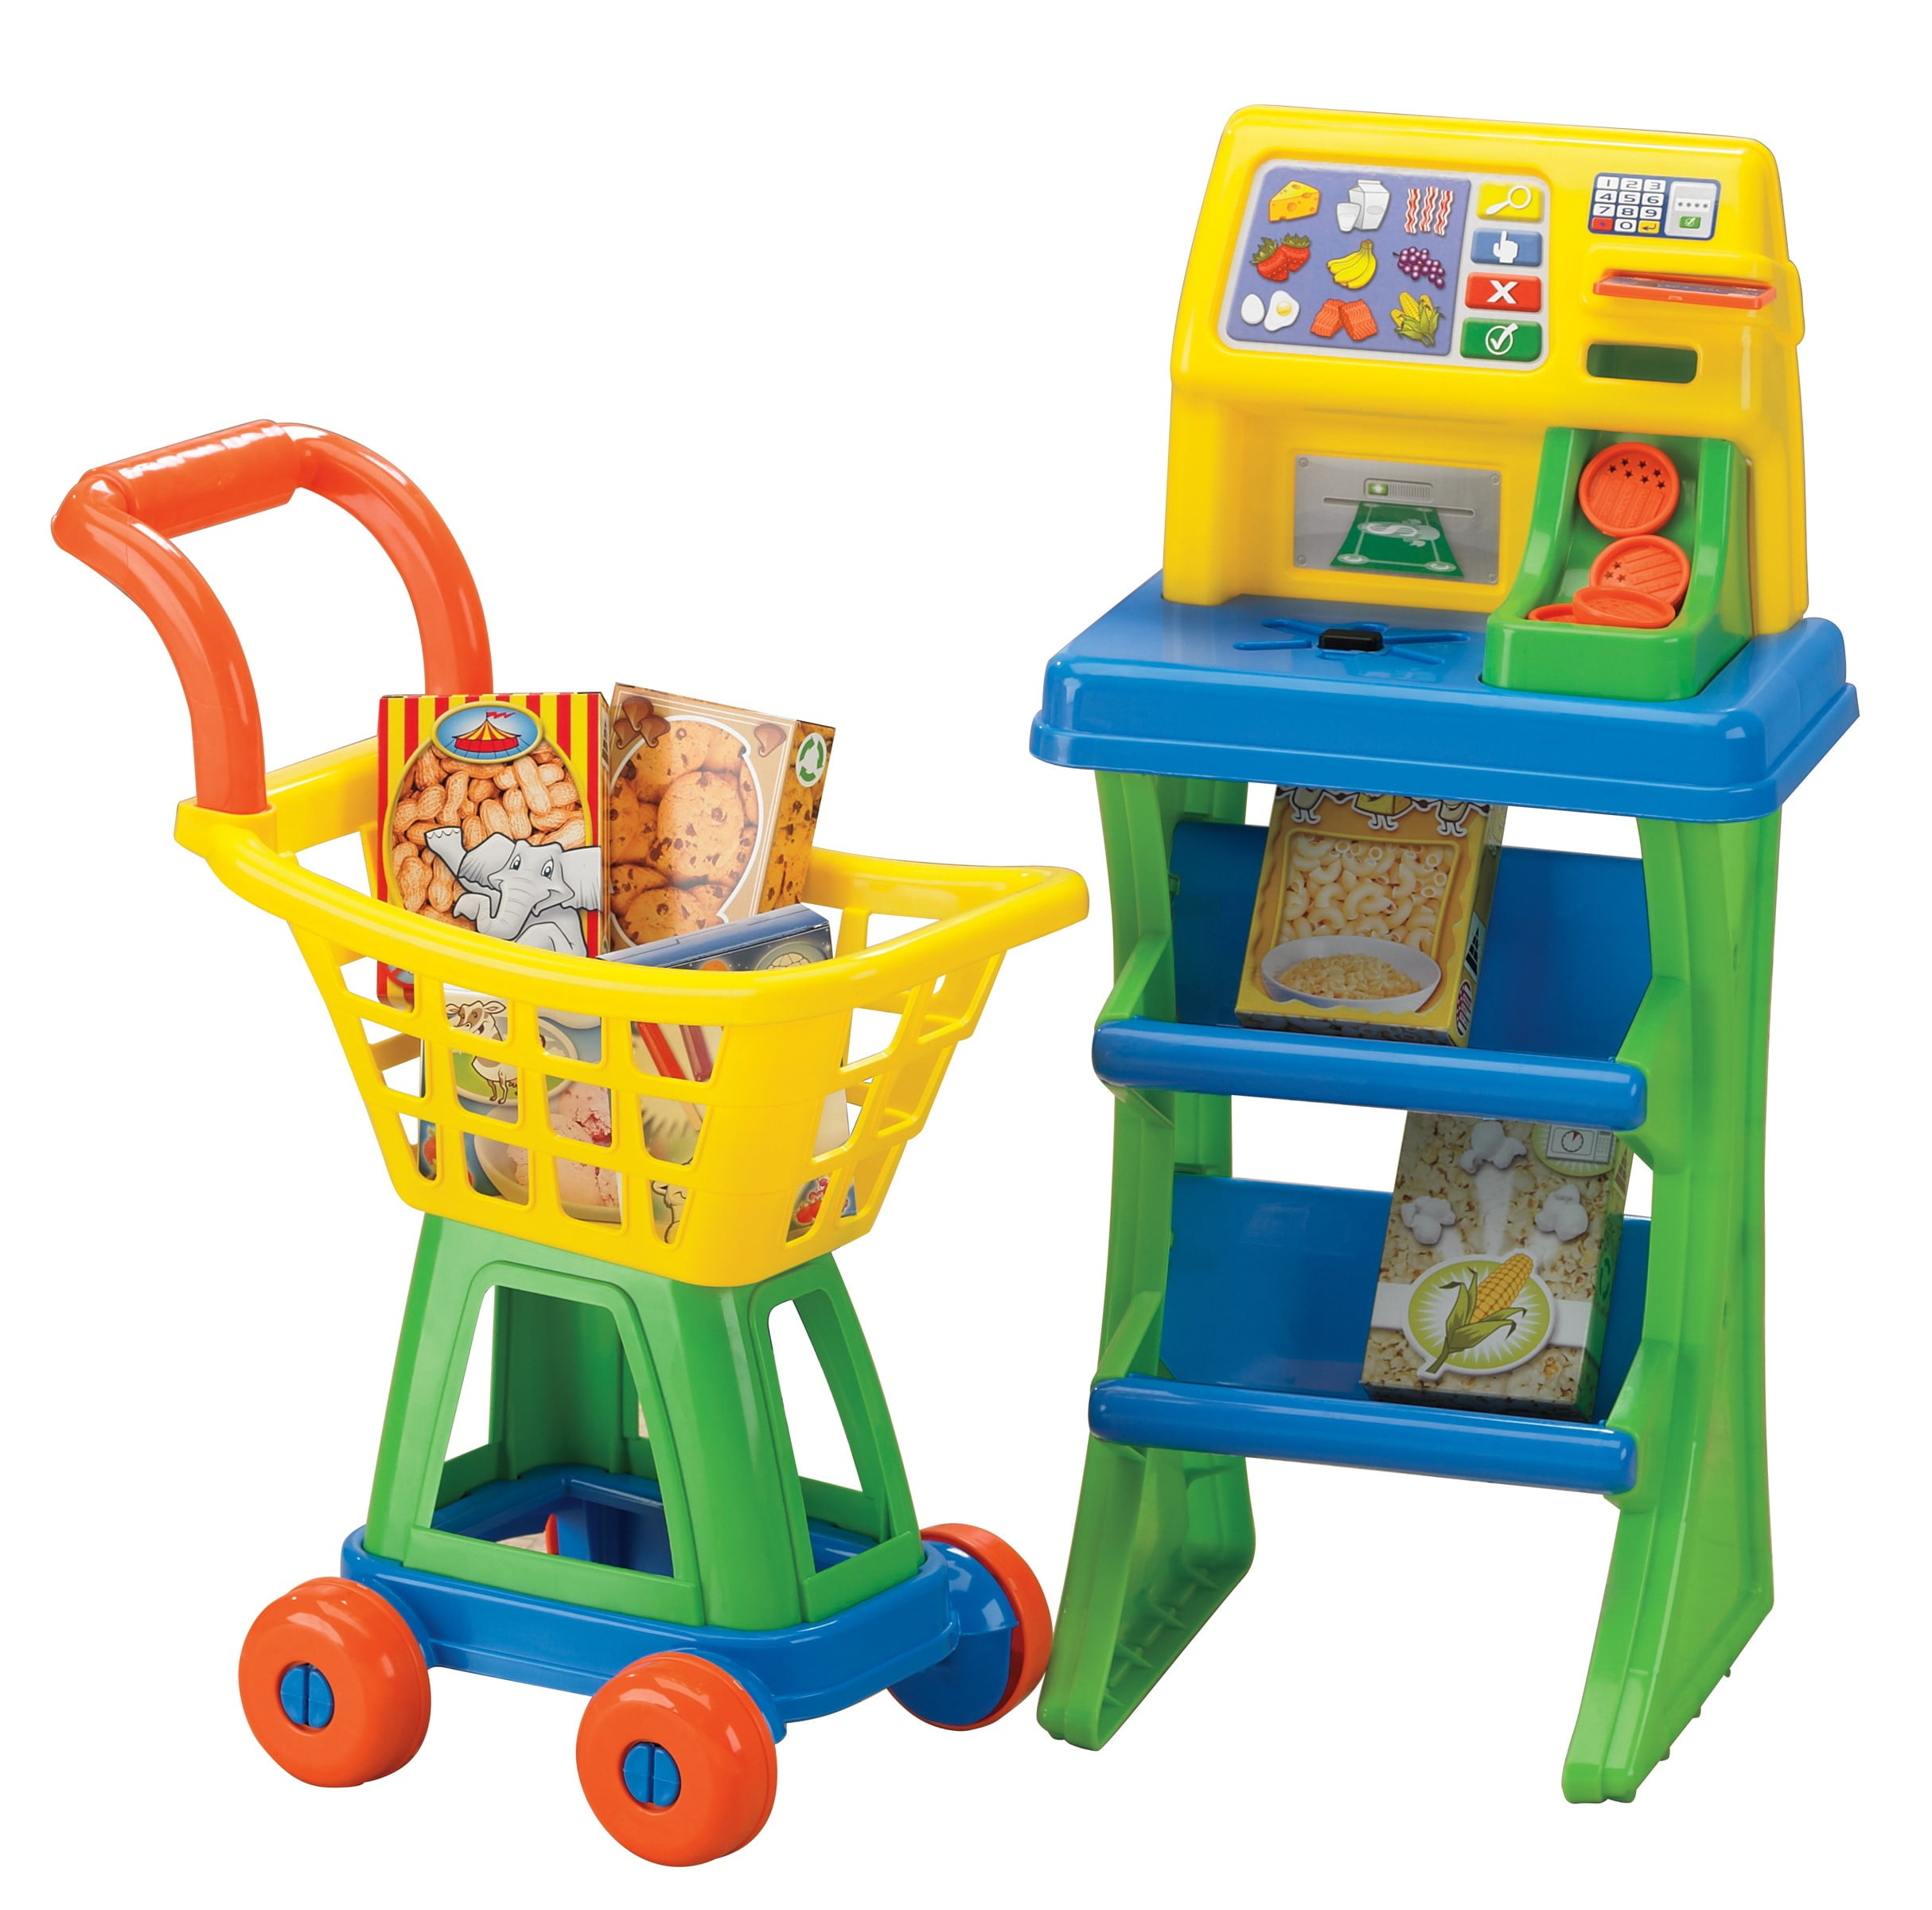 AMERICAN PLASTIC TOYS,MY VERY OWN SHOPPING CART PLAYSET,W/ PLAY FOOD,KIDS 3+,NEW 